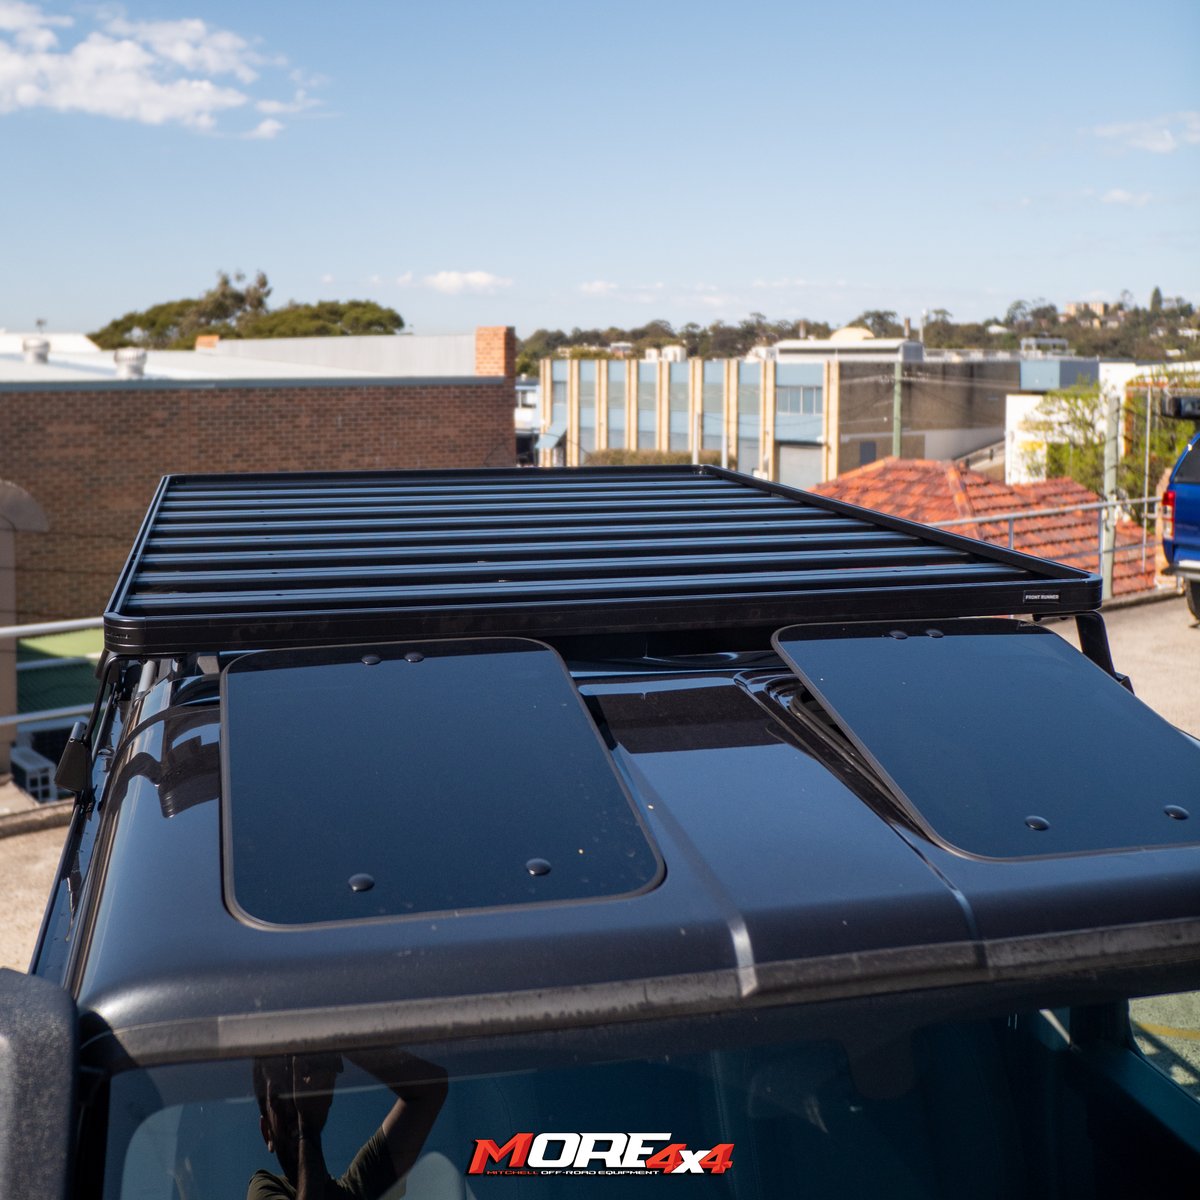 The first #IneosGrenadier at the shop! The owner required a storage solution and the Front Runner Slimline II roof rack was solution that best suited his needs 🙌
.
more4x4.com.au/collections/in…
.
#frontrunner #frontrunneroutfitters #INEOS #grenadier #Grenadier4x4 #INEOSGrenadier